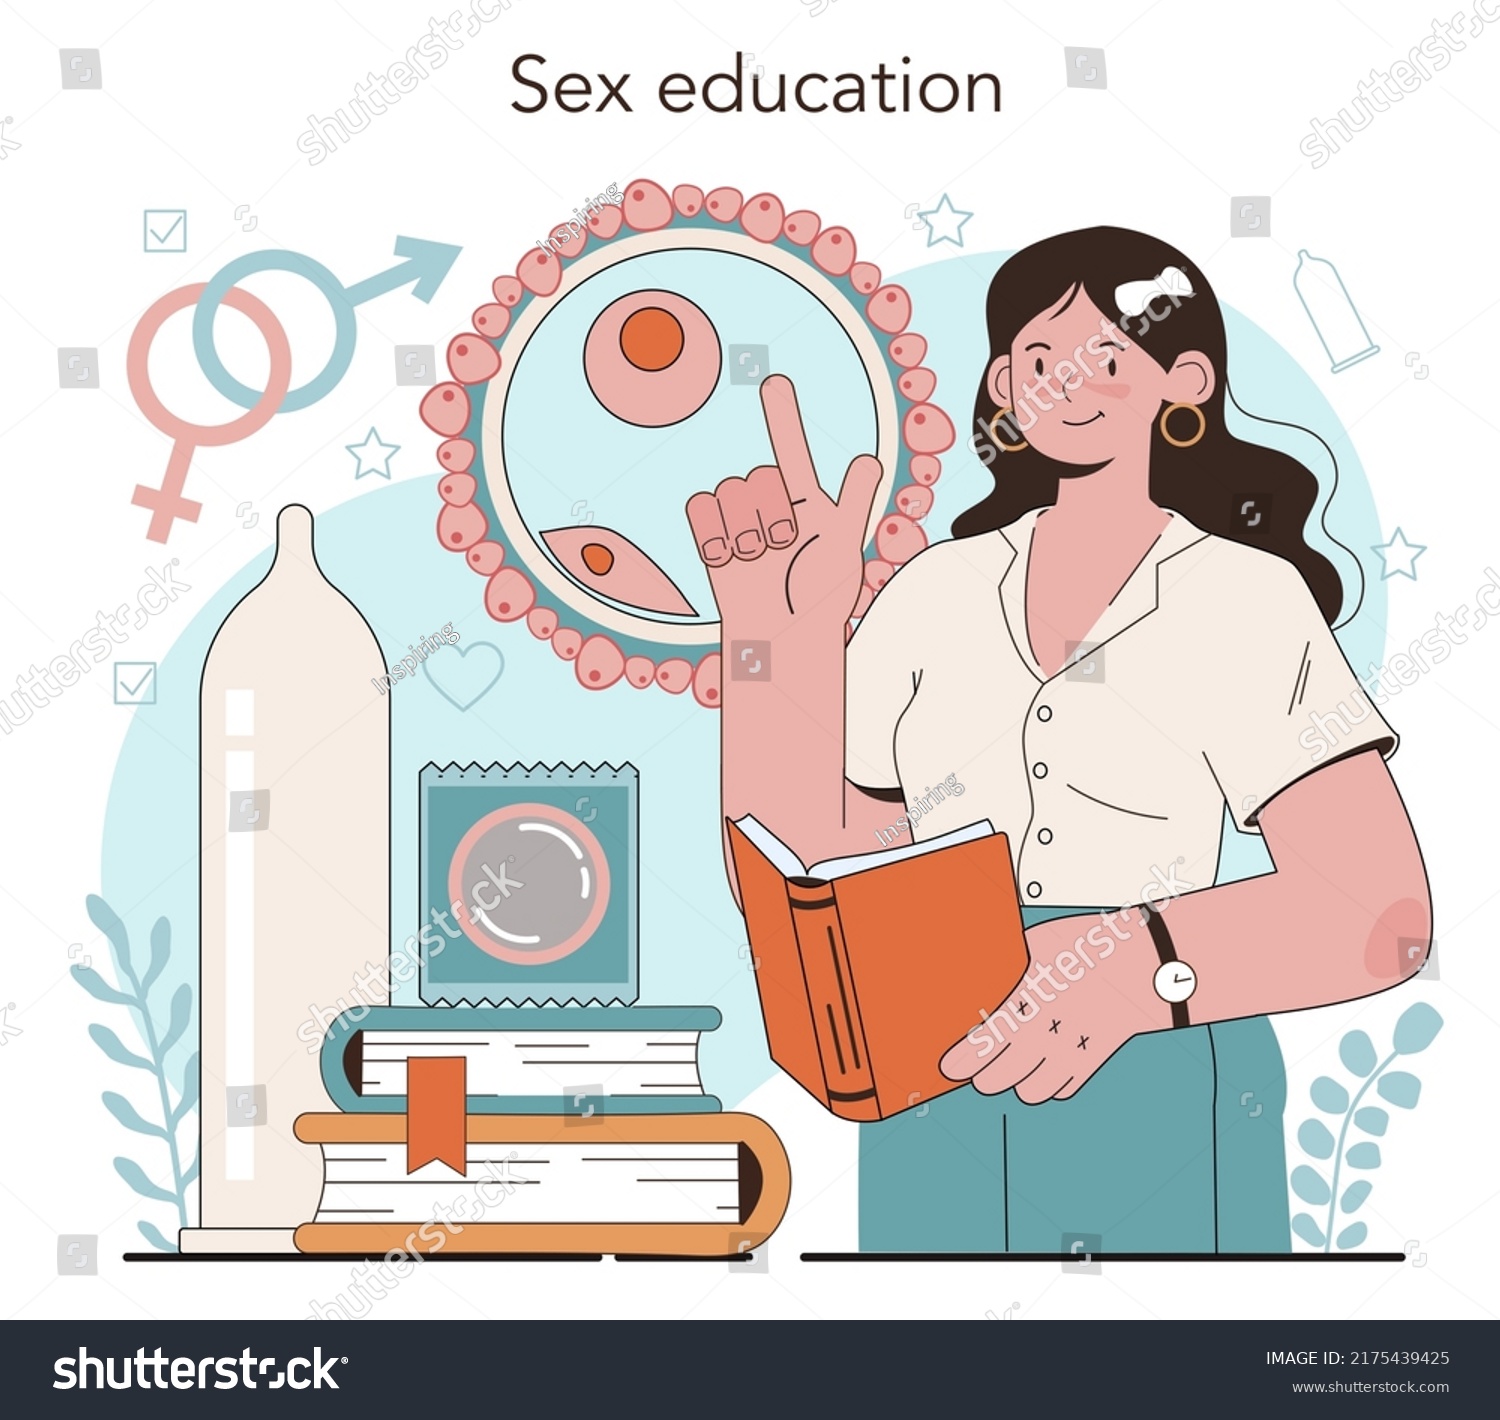 Sexual Education Concept Sexual Health Lesson Stock Vector Royalty Free 2175439425 Shutterstock 7921